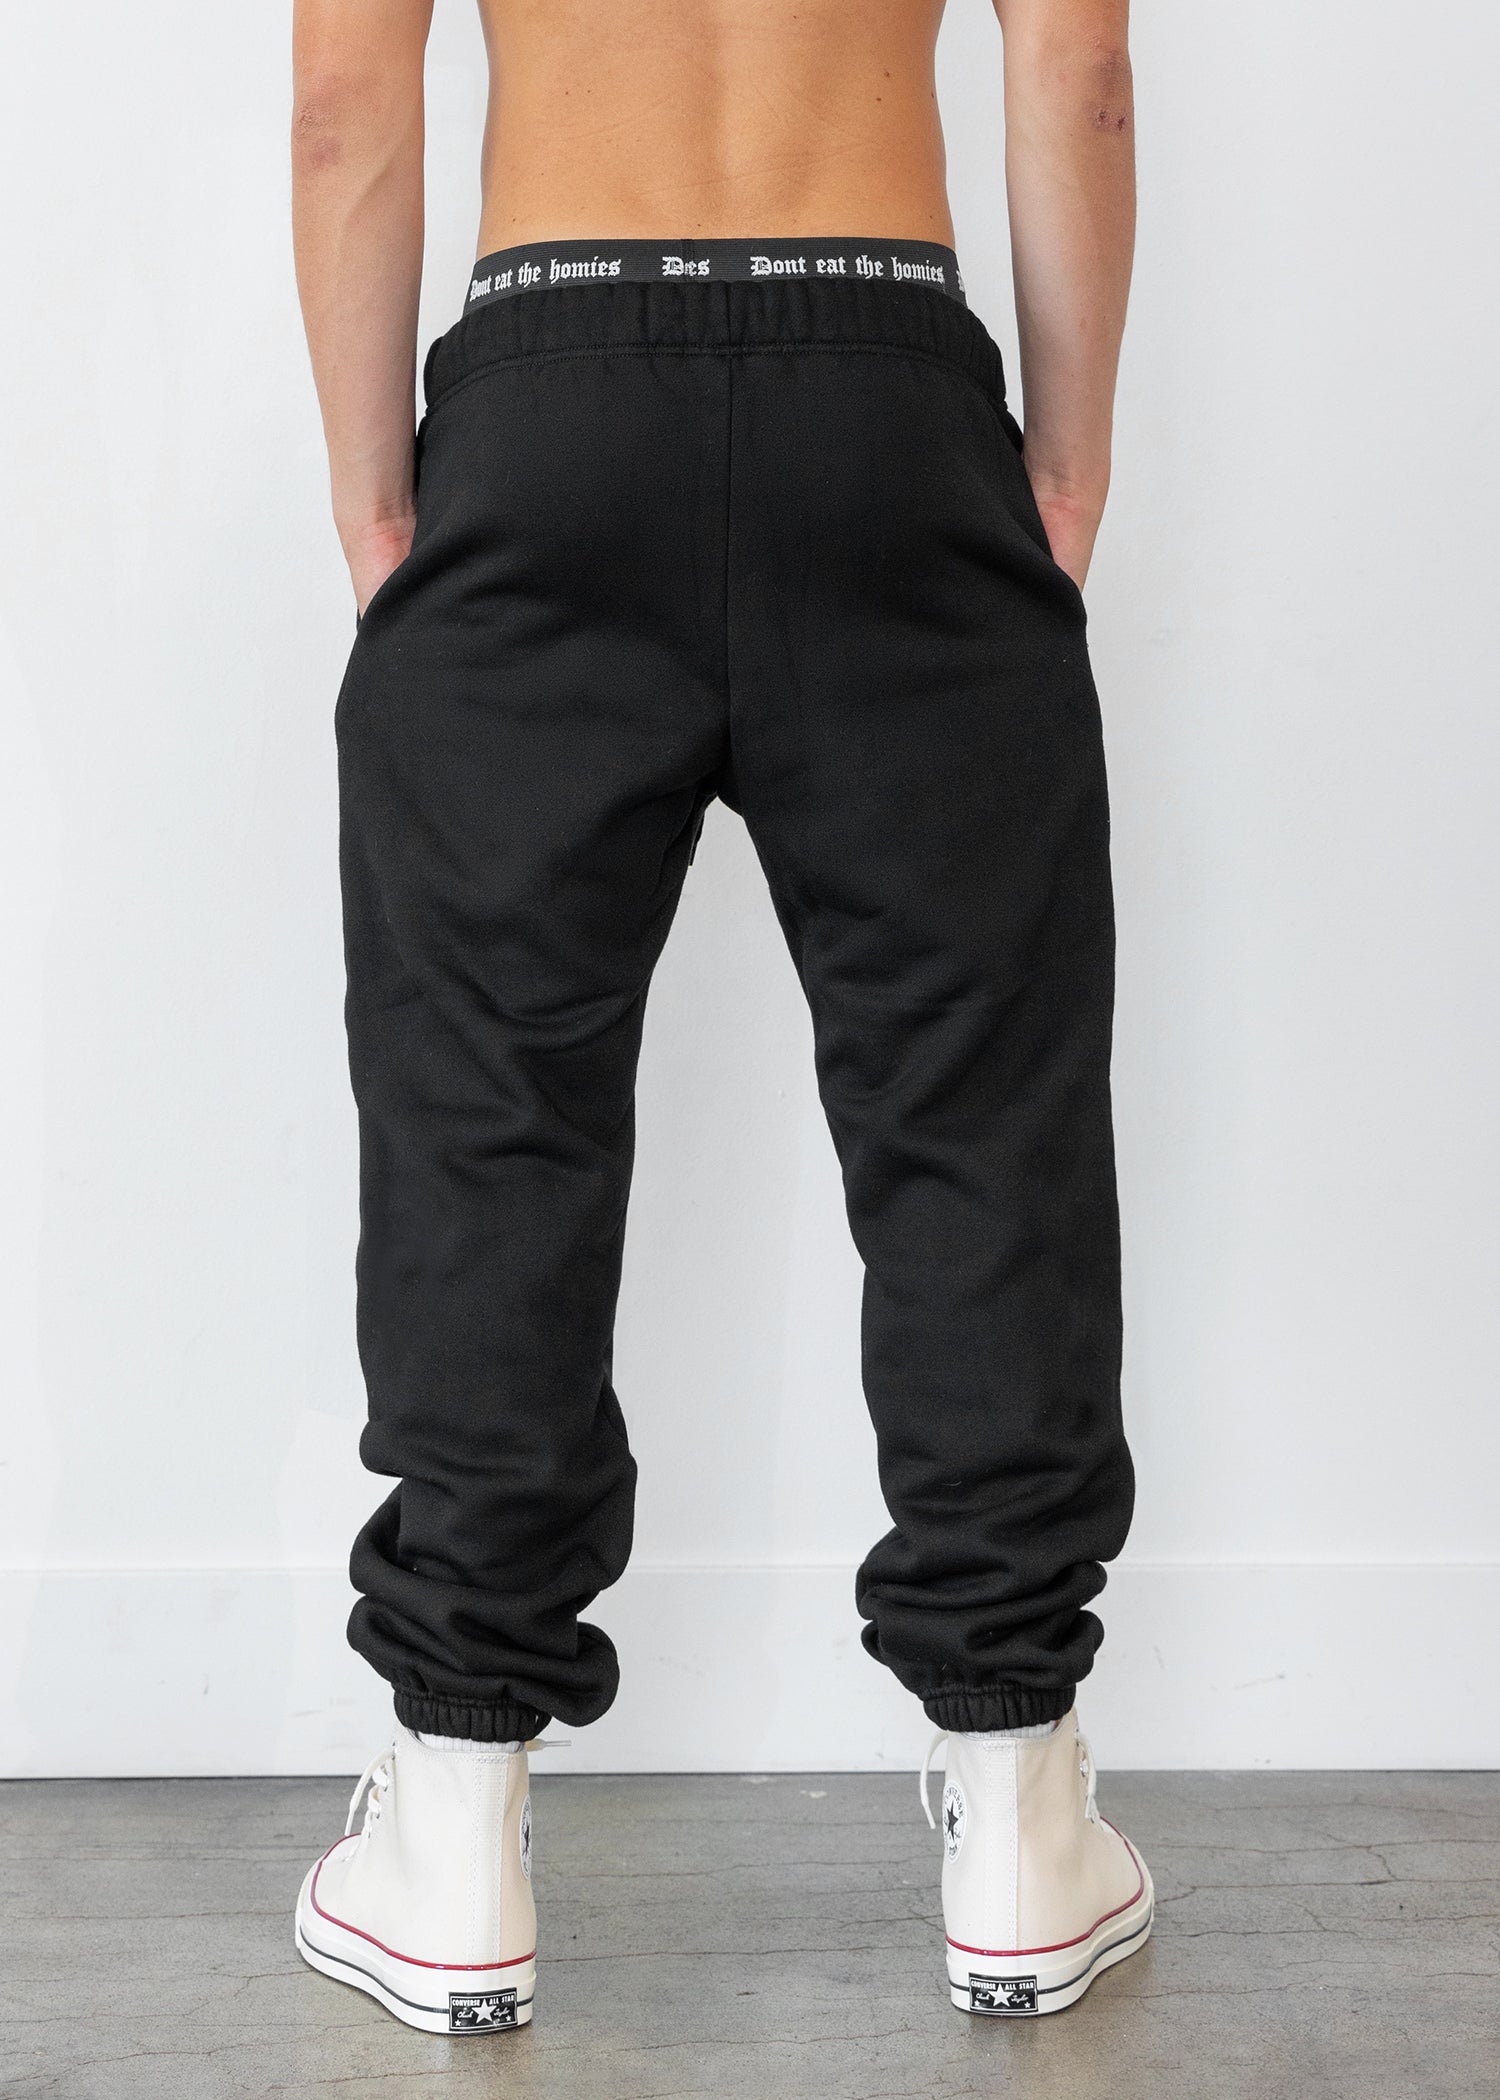 DONT EAT THE HOMIES - DETH TONAL EMBROIDERED SWEATPANTS – Don't